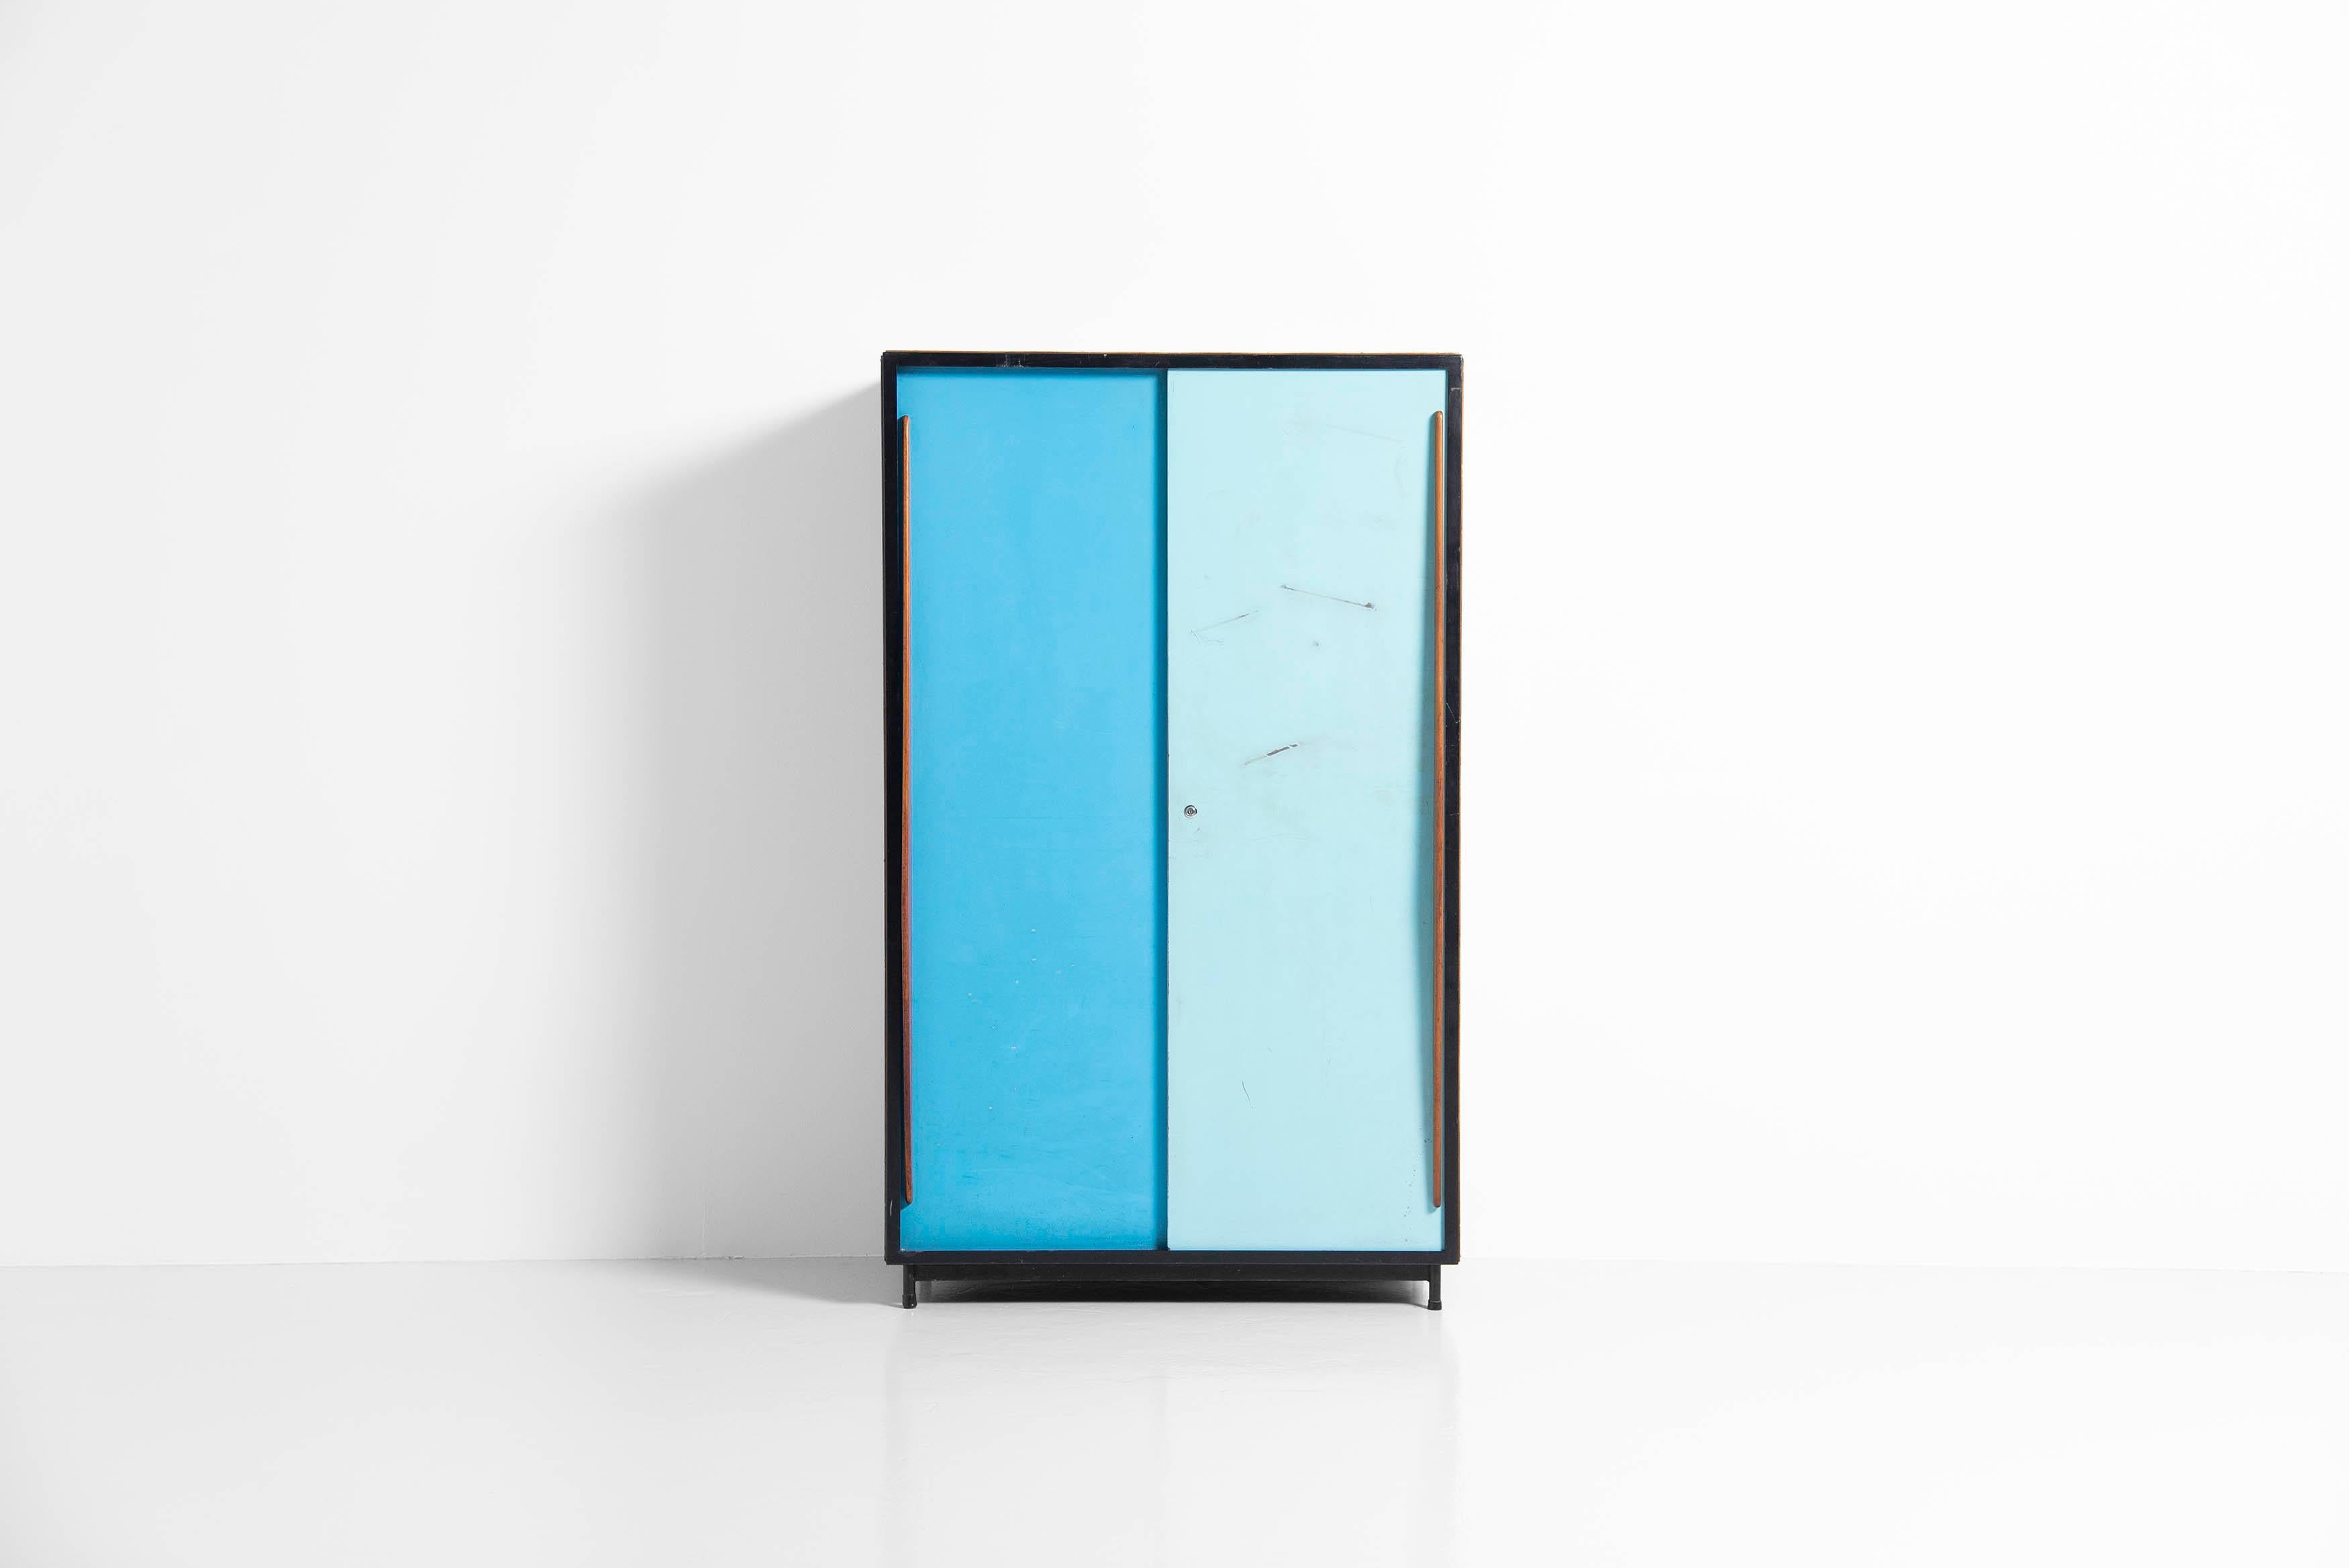 Nice large modernist wardrobe designed by Willy van der Meeren and manufactured by Tubax, Belgium 1952. This wardrobe was actually designed for schools but are used for multiple purposes now. Very nice example of Belgian modernism designed by van